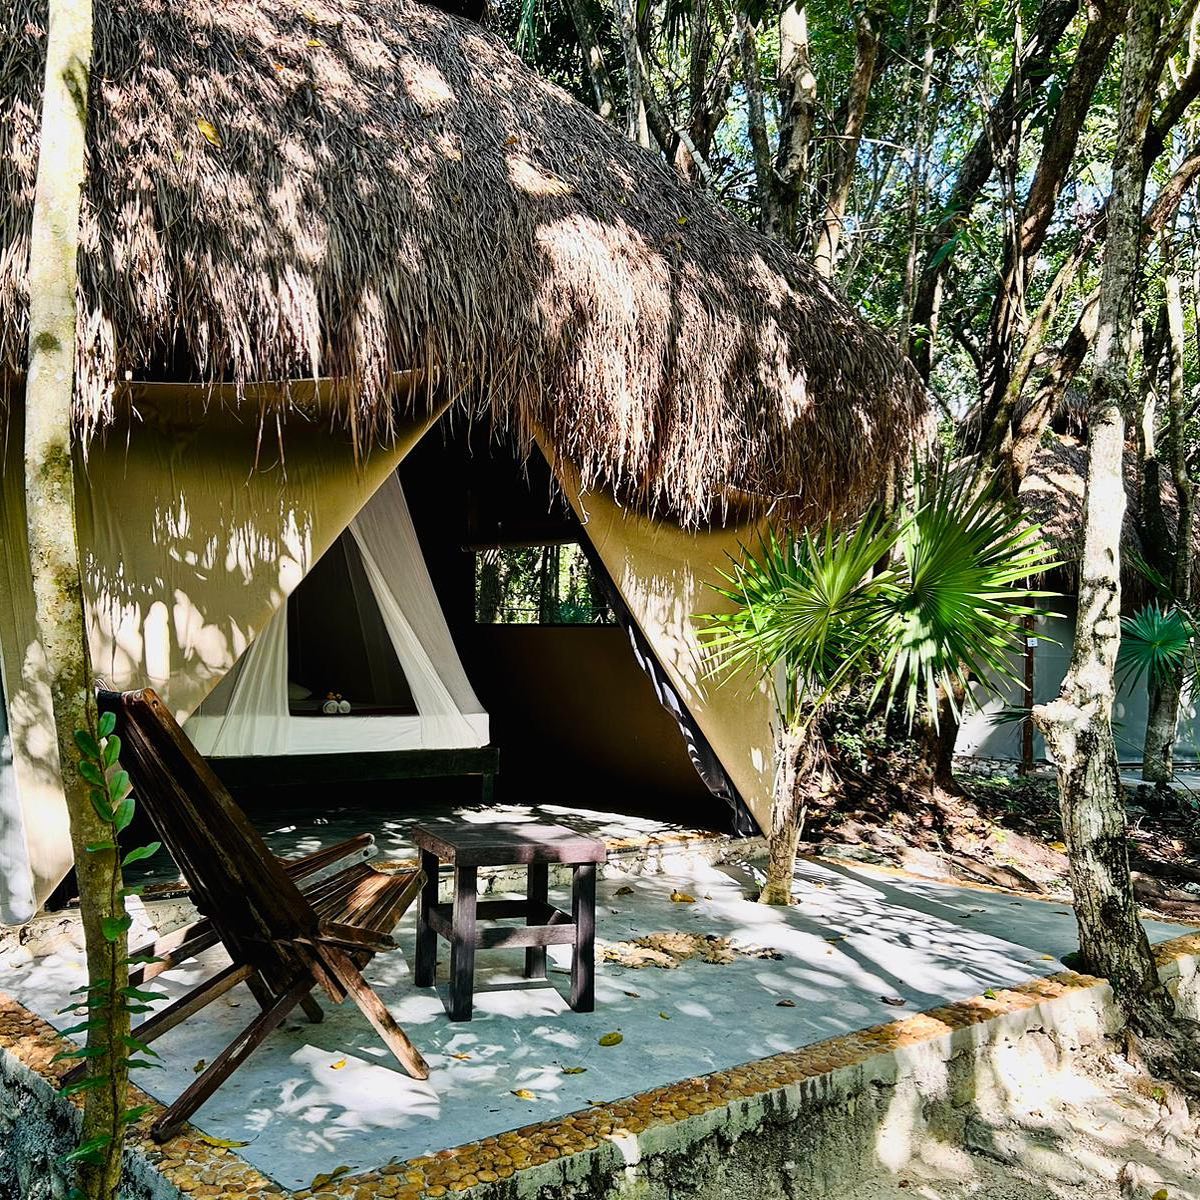 Wake up to breathtaking views at our tents, carefully designed to blend into the environment and offer you an unforgettable experience of reconnection. Book your stay with us!

#Akumal #Mexico #RivieraMaya #glamping #hotels #jungle #nature #travel